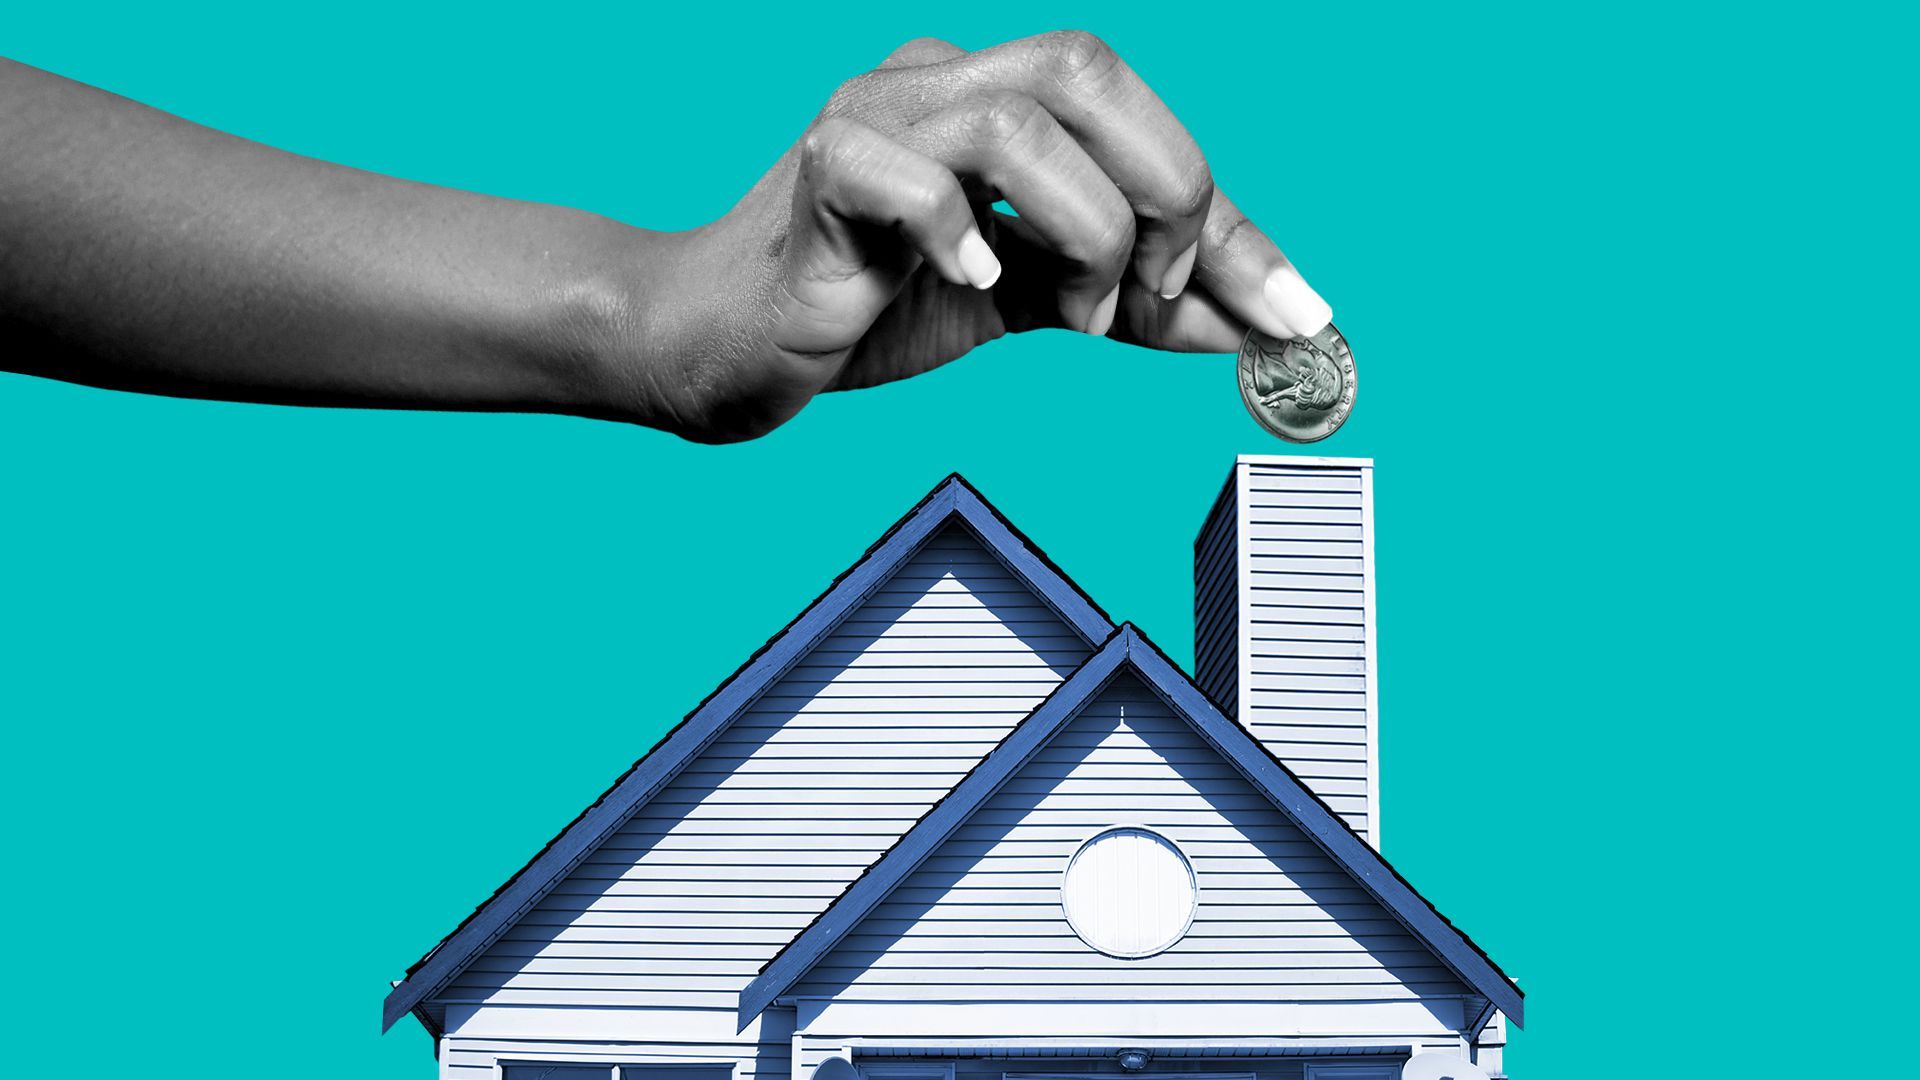 Illustration of a hand placing a quarter into a house chimney